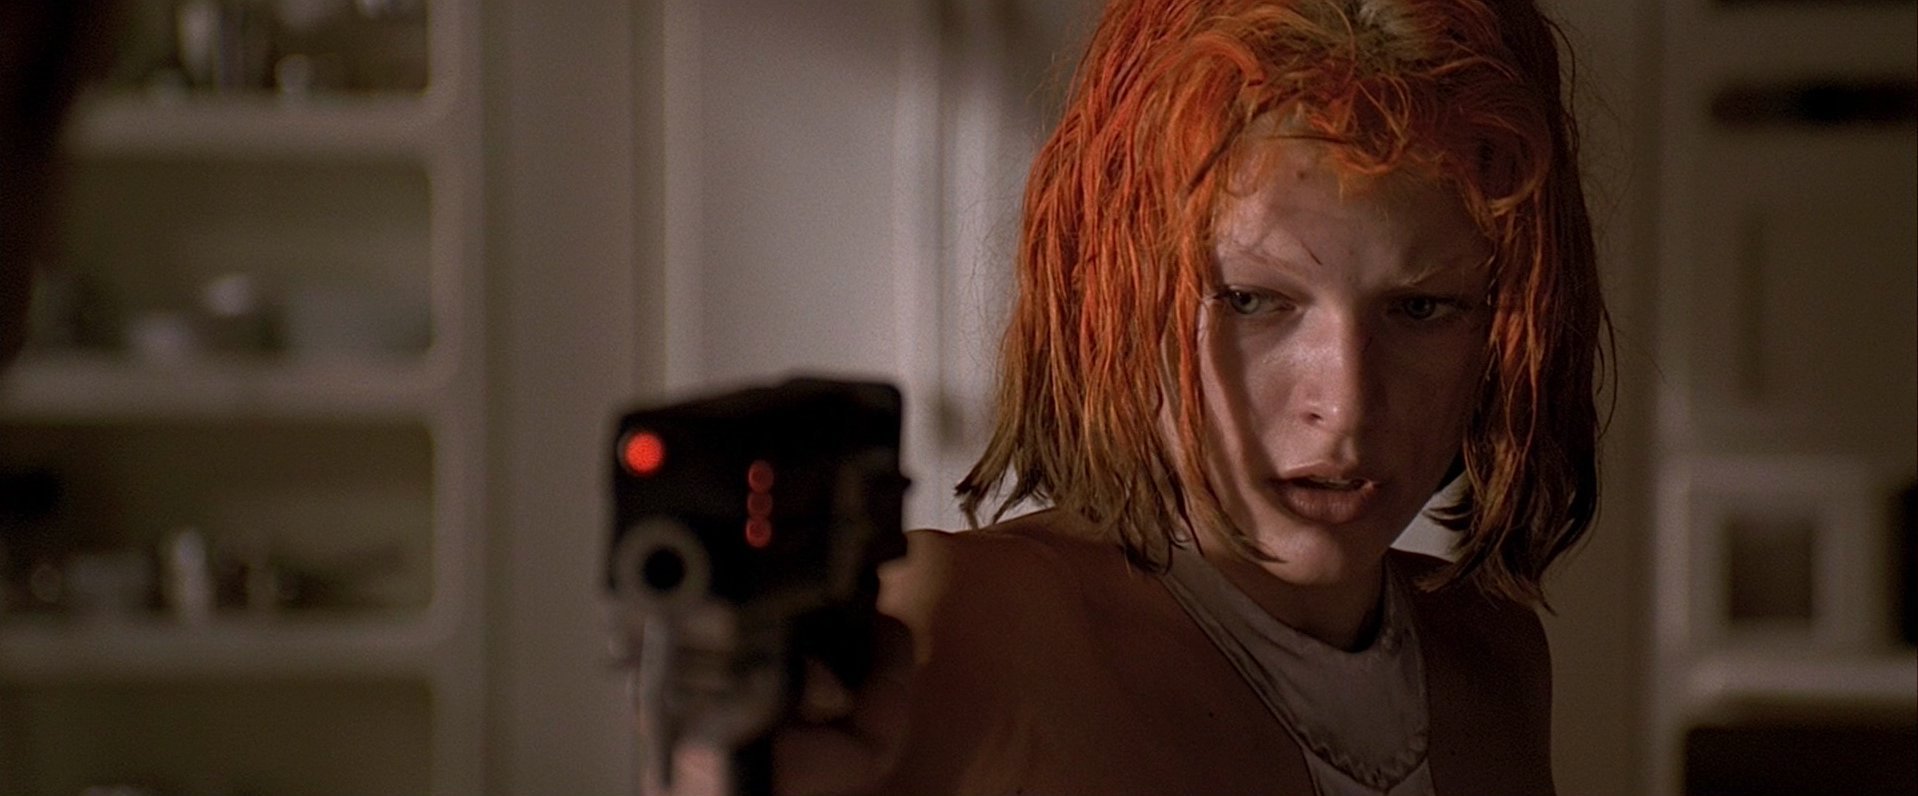 Image of The Fifth Element for fans of The Fifth Element. 